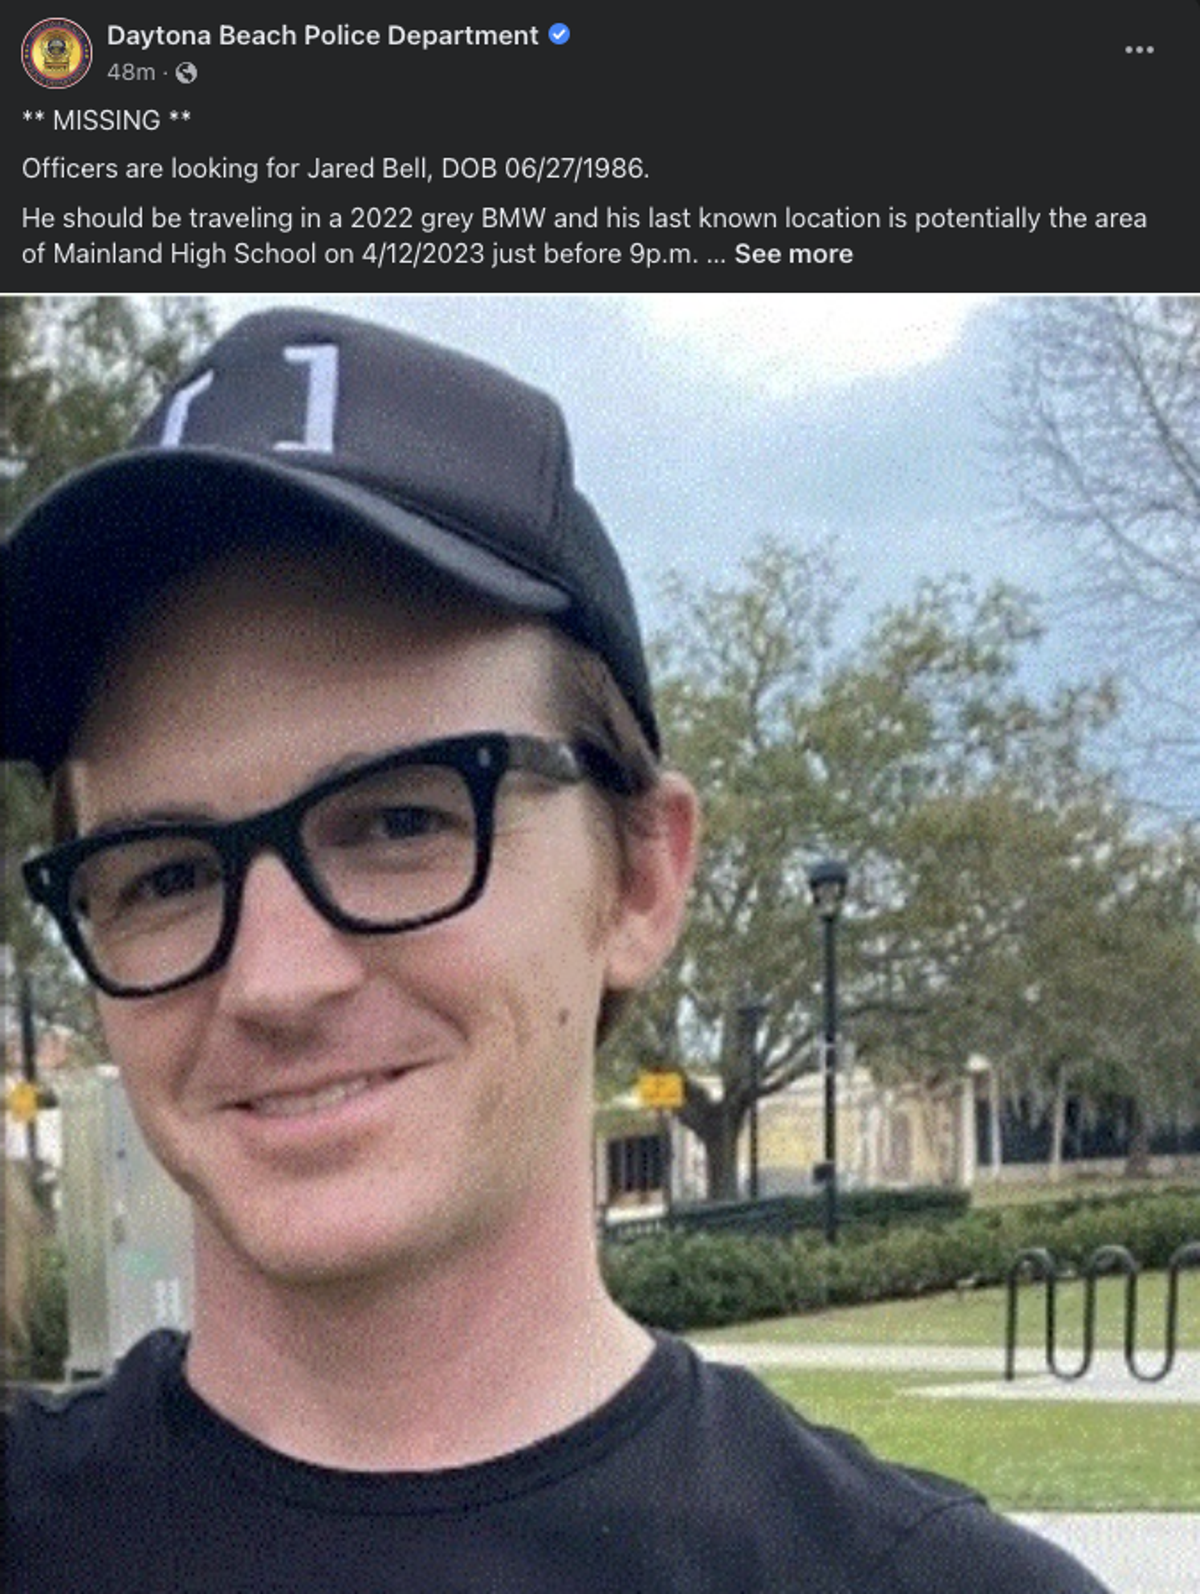 Drake Bell reported missing (Daytona Beach Police Department Facebook page)